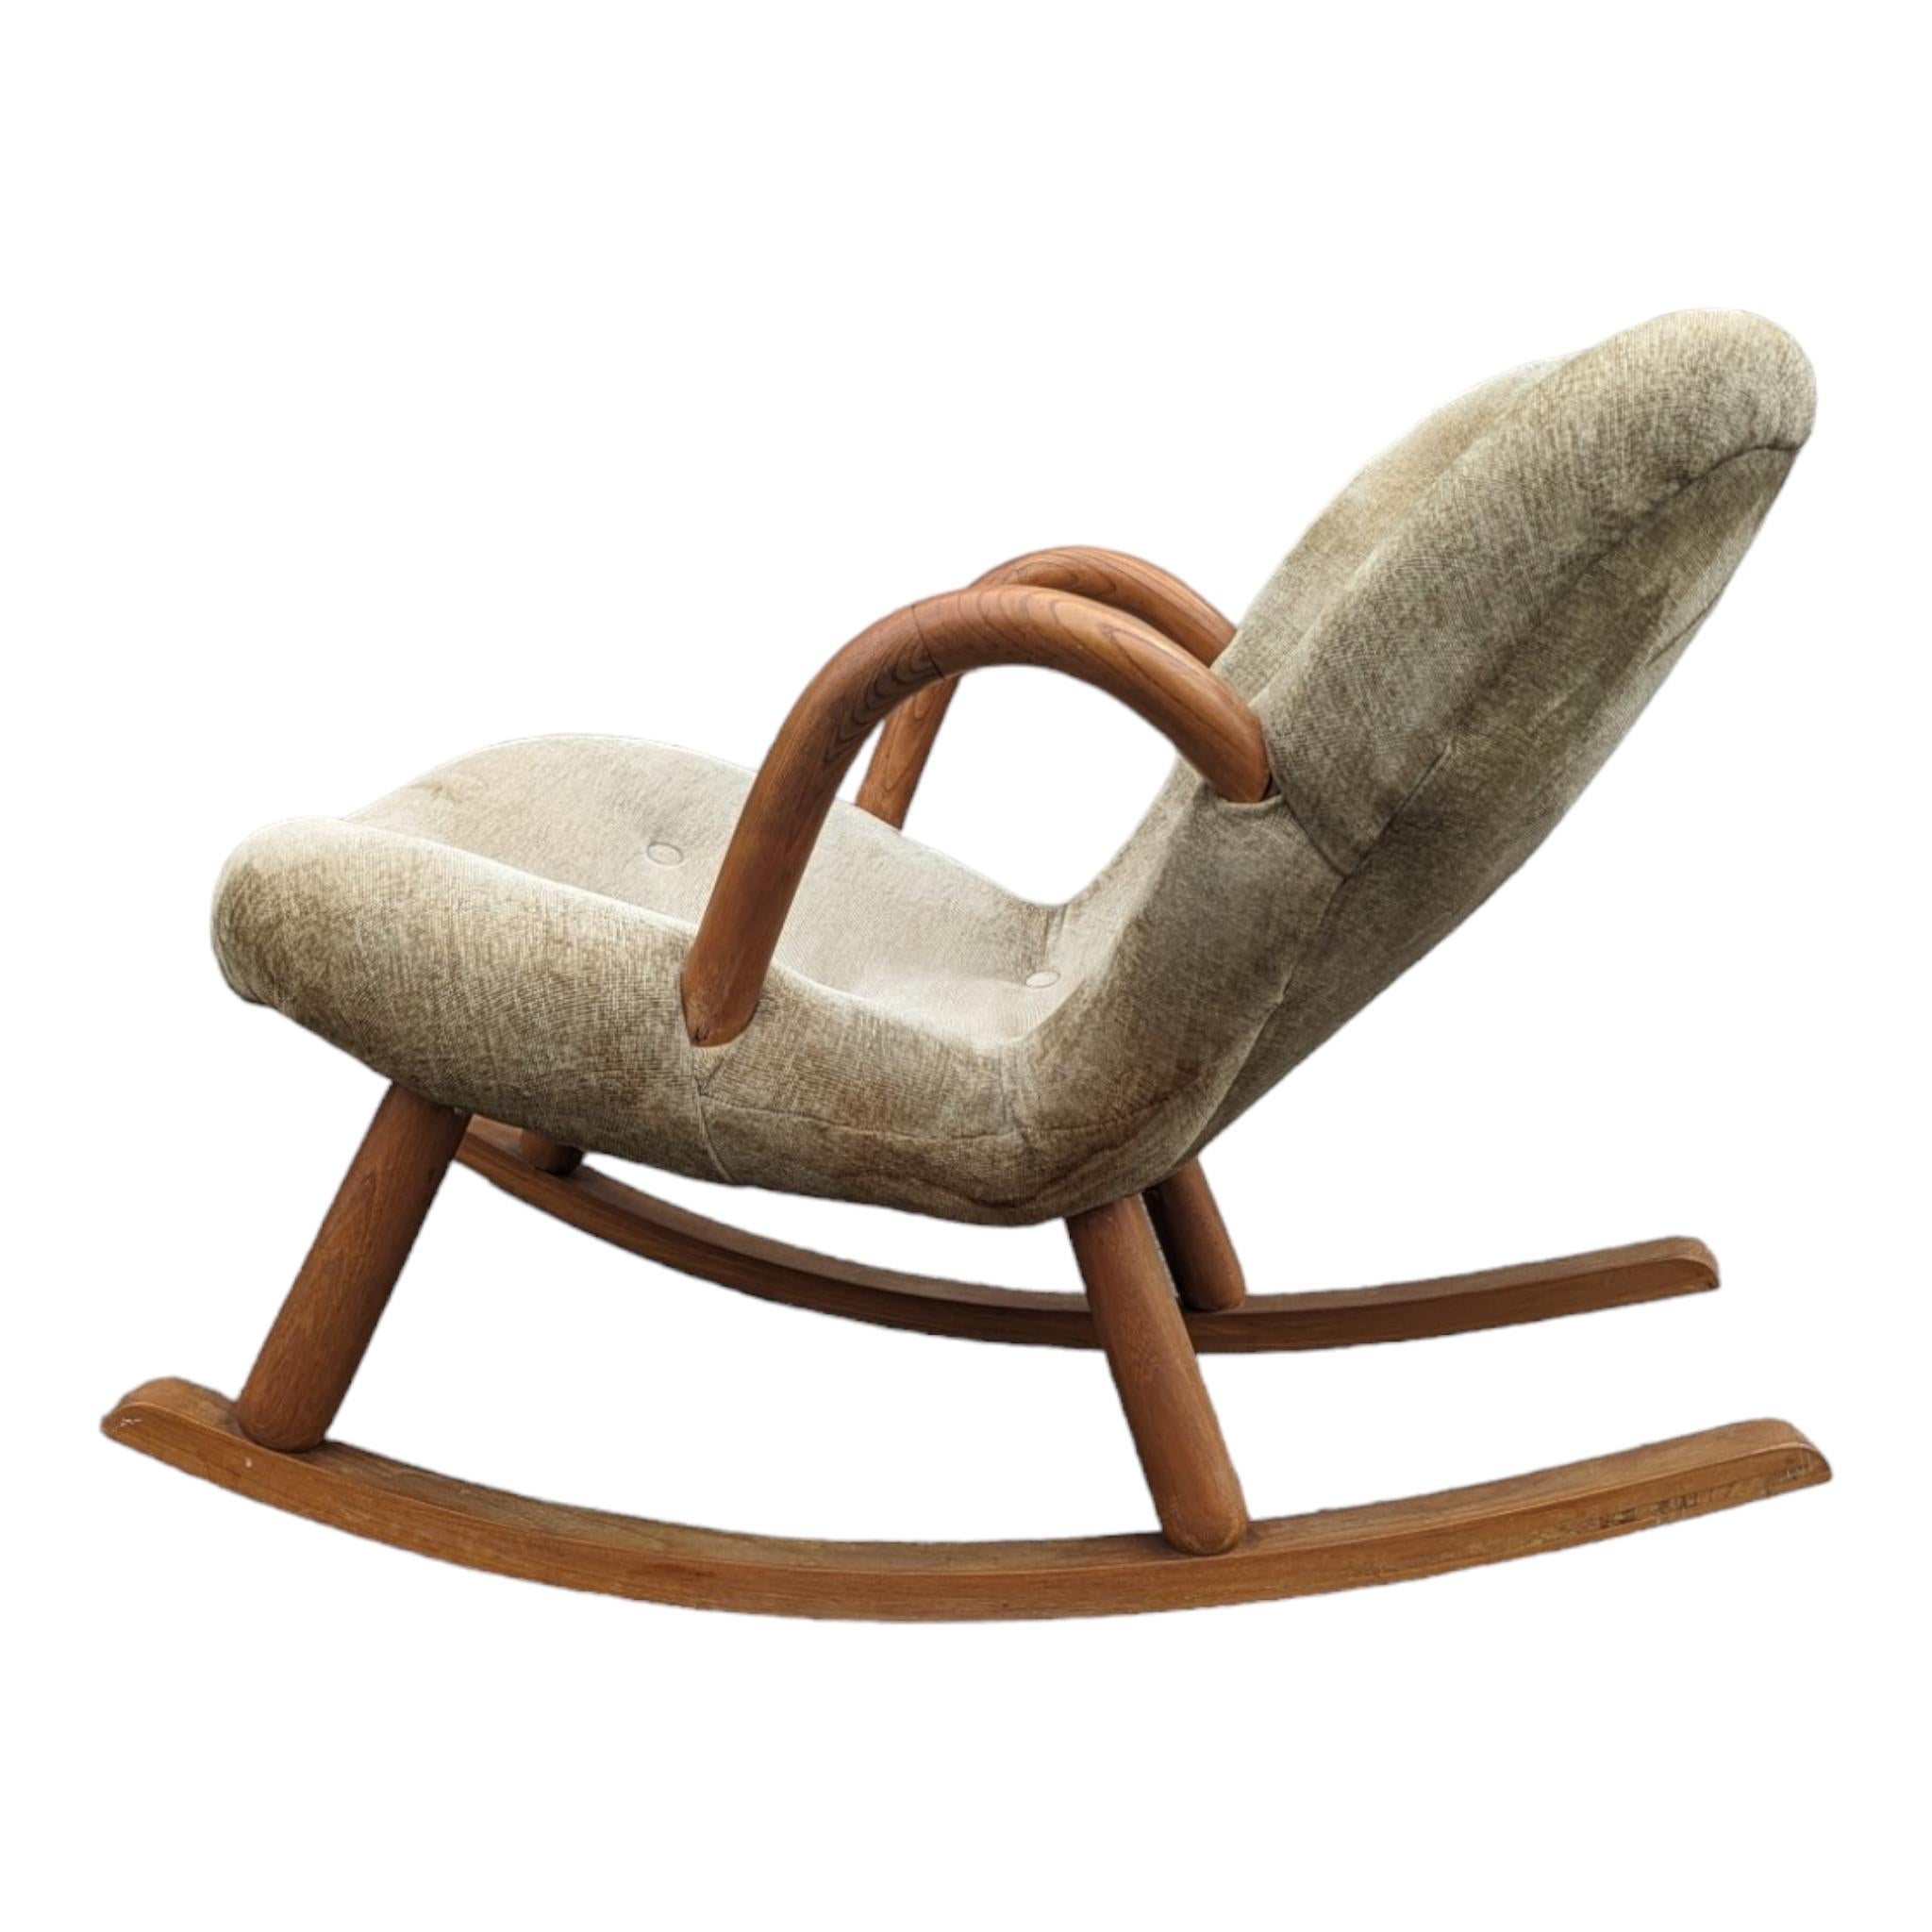 Rare Arnold Madsen Attributed Clam Rocking Chair circa 1960s For Sale 7